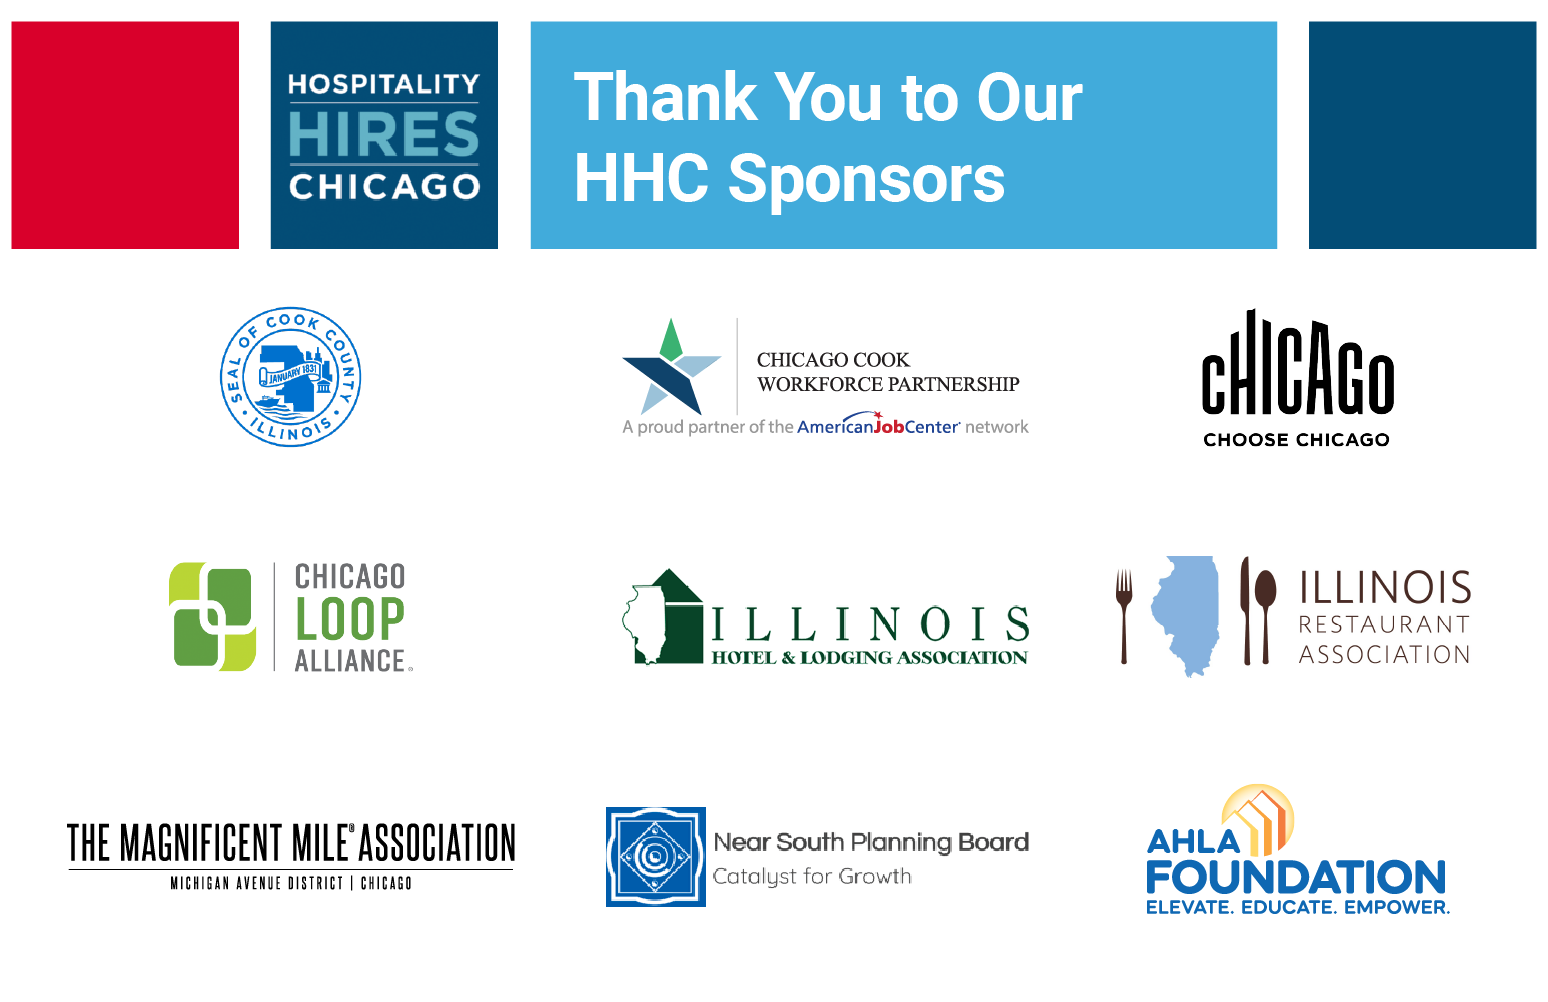 Hospitality Hires Chicago is Sponsored By Cook County. Chicago Cook Workforce Partnership. Choose Chicago. Chicago Loop Alliance. Illinois Hotel & Lodging Association. Illinois Restaurant Association. The Magnificent Mile Association. Near South Planning Board. World Business Chicago.